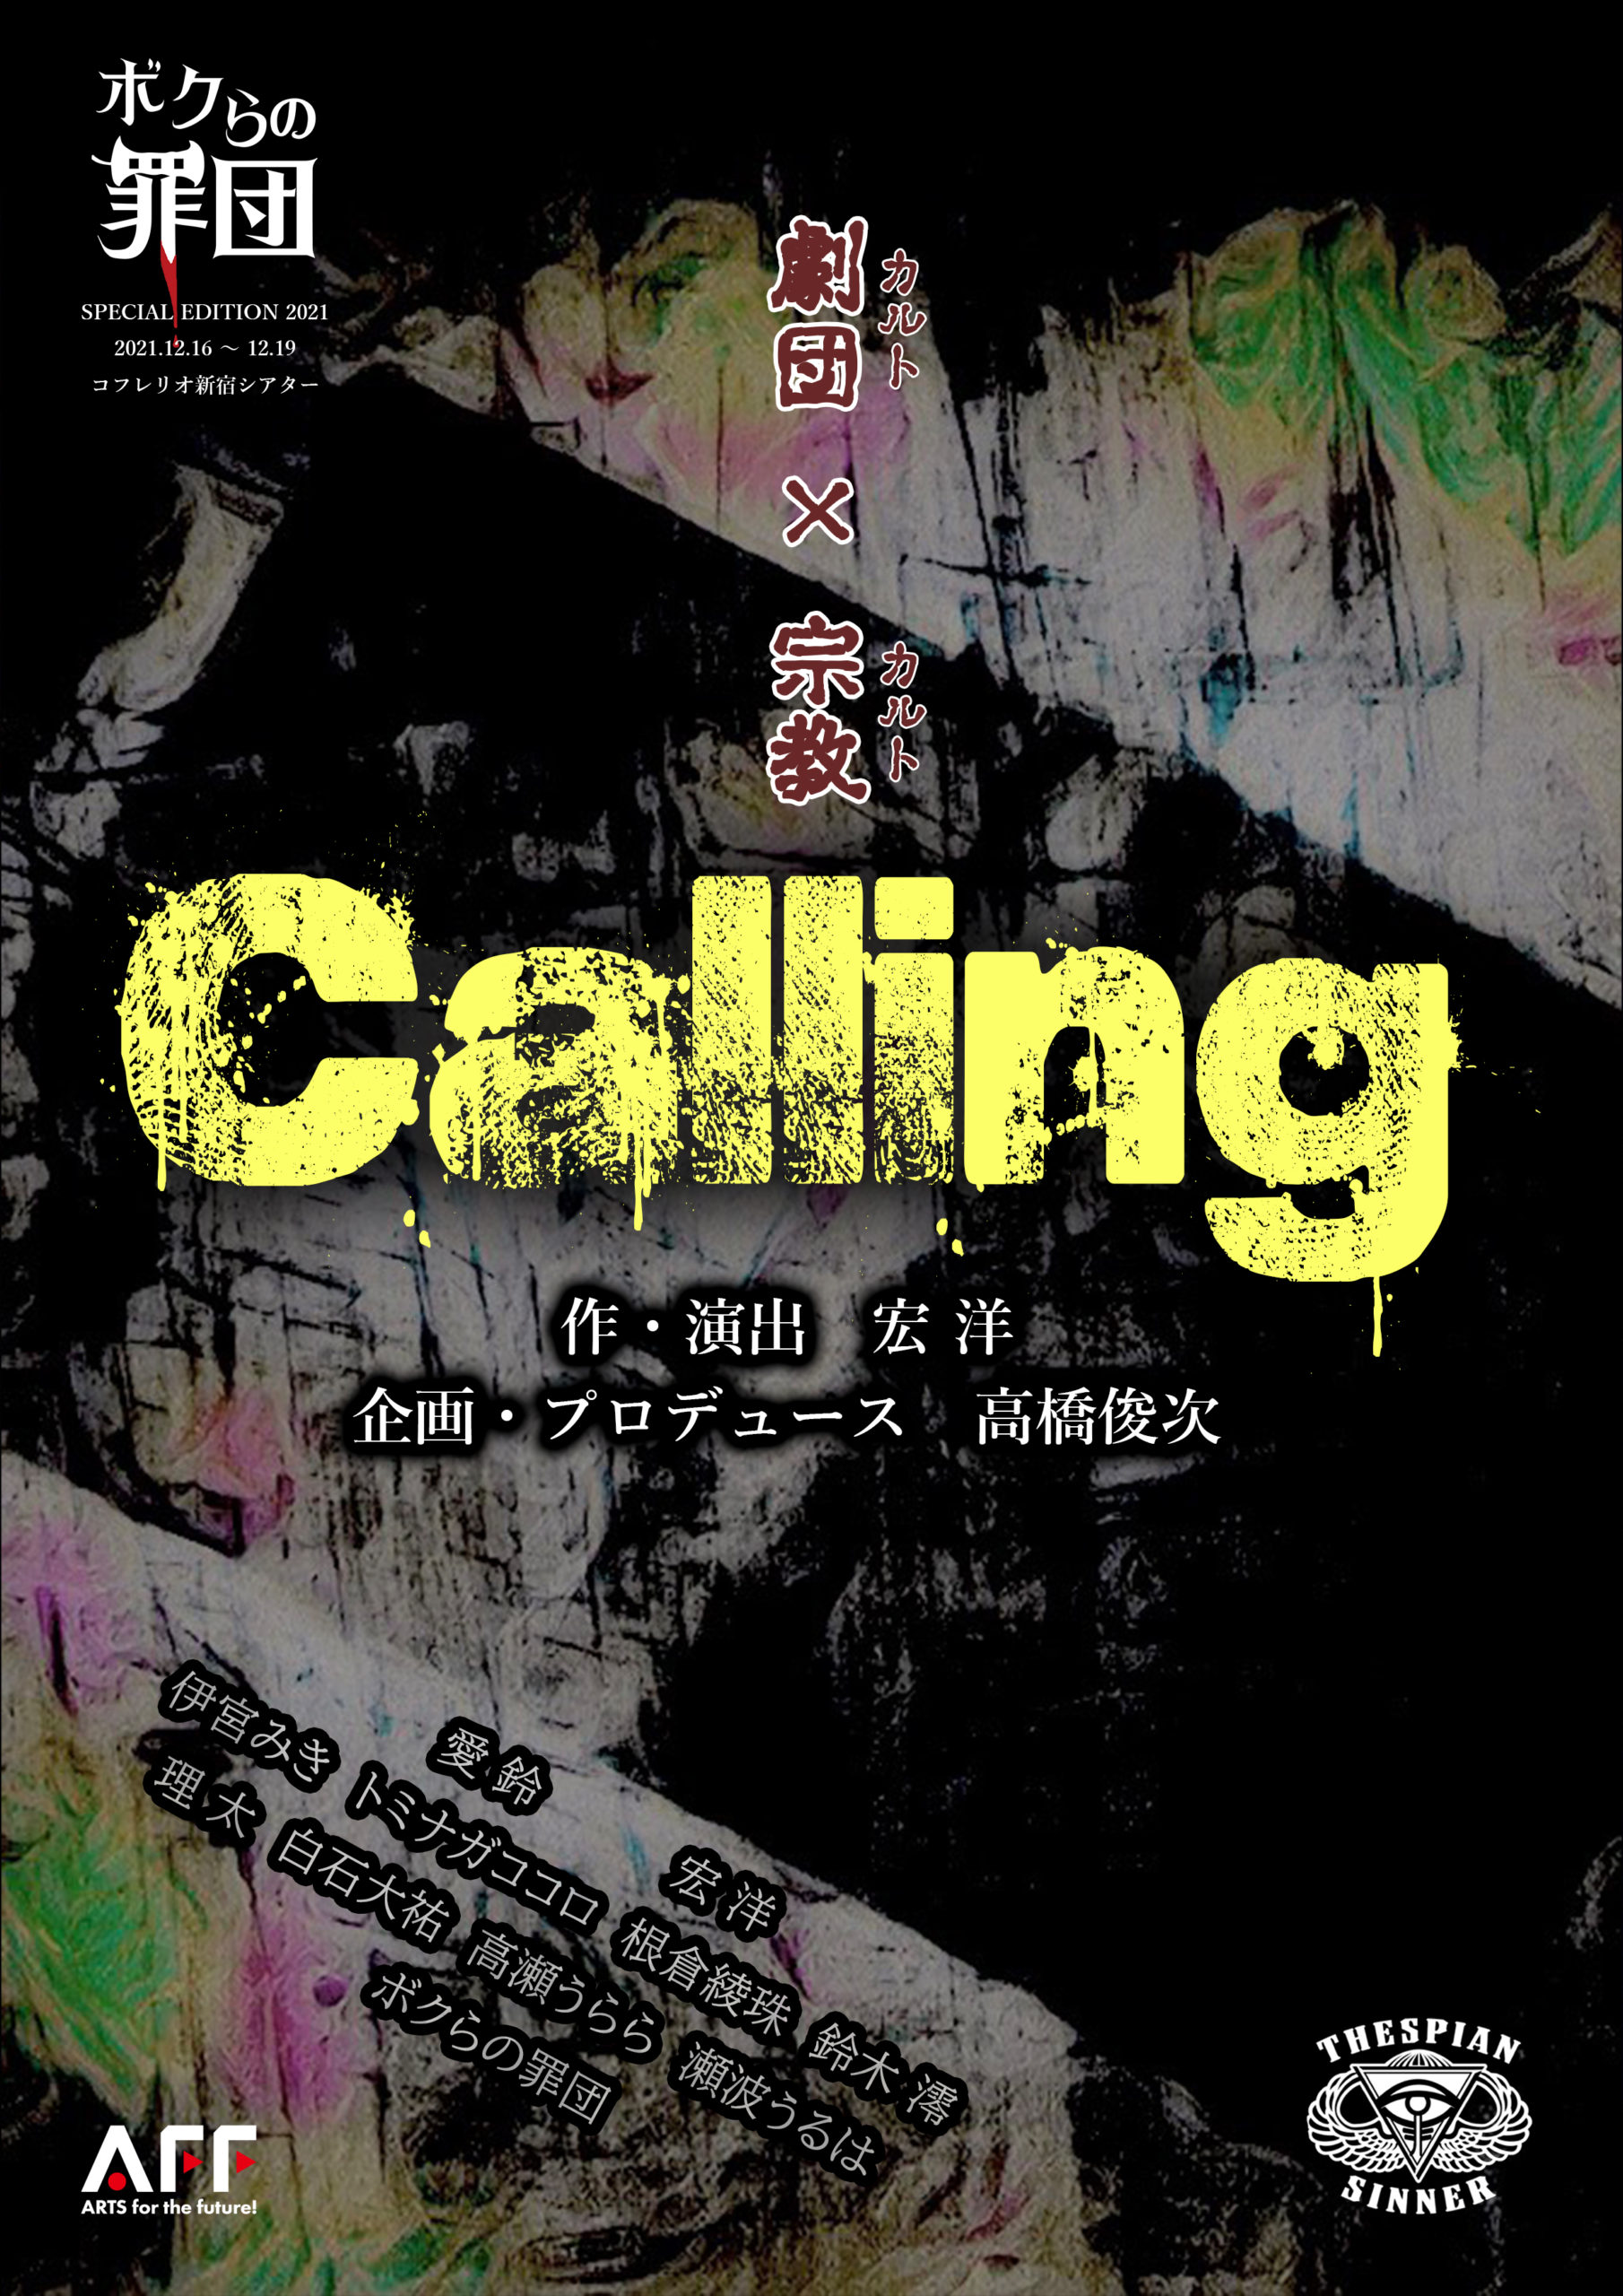 SPECIAL EDITION 2021『Calling』